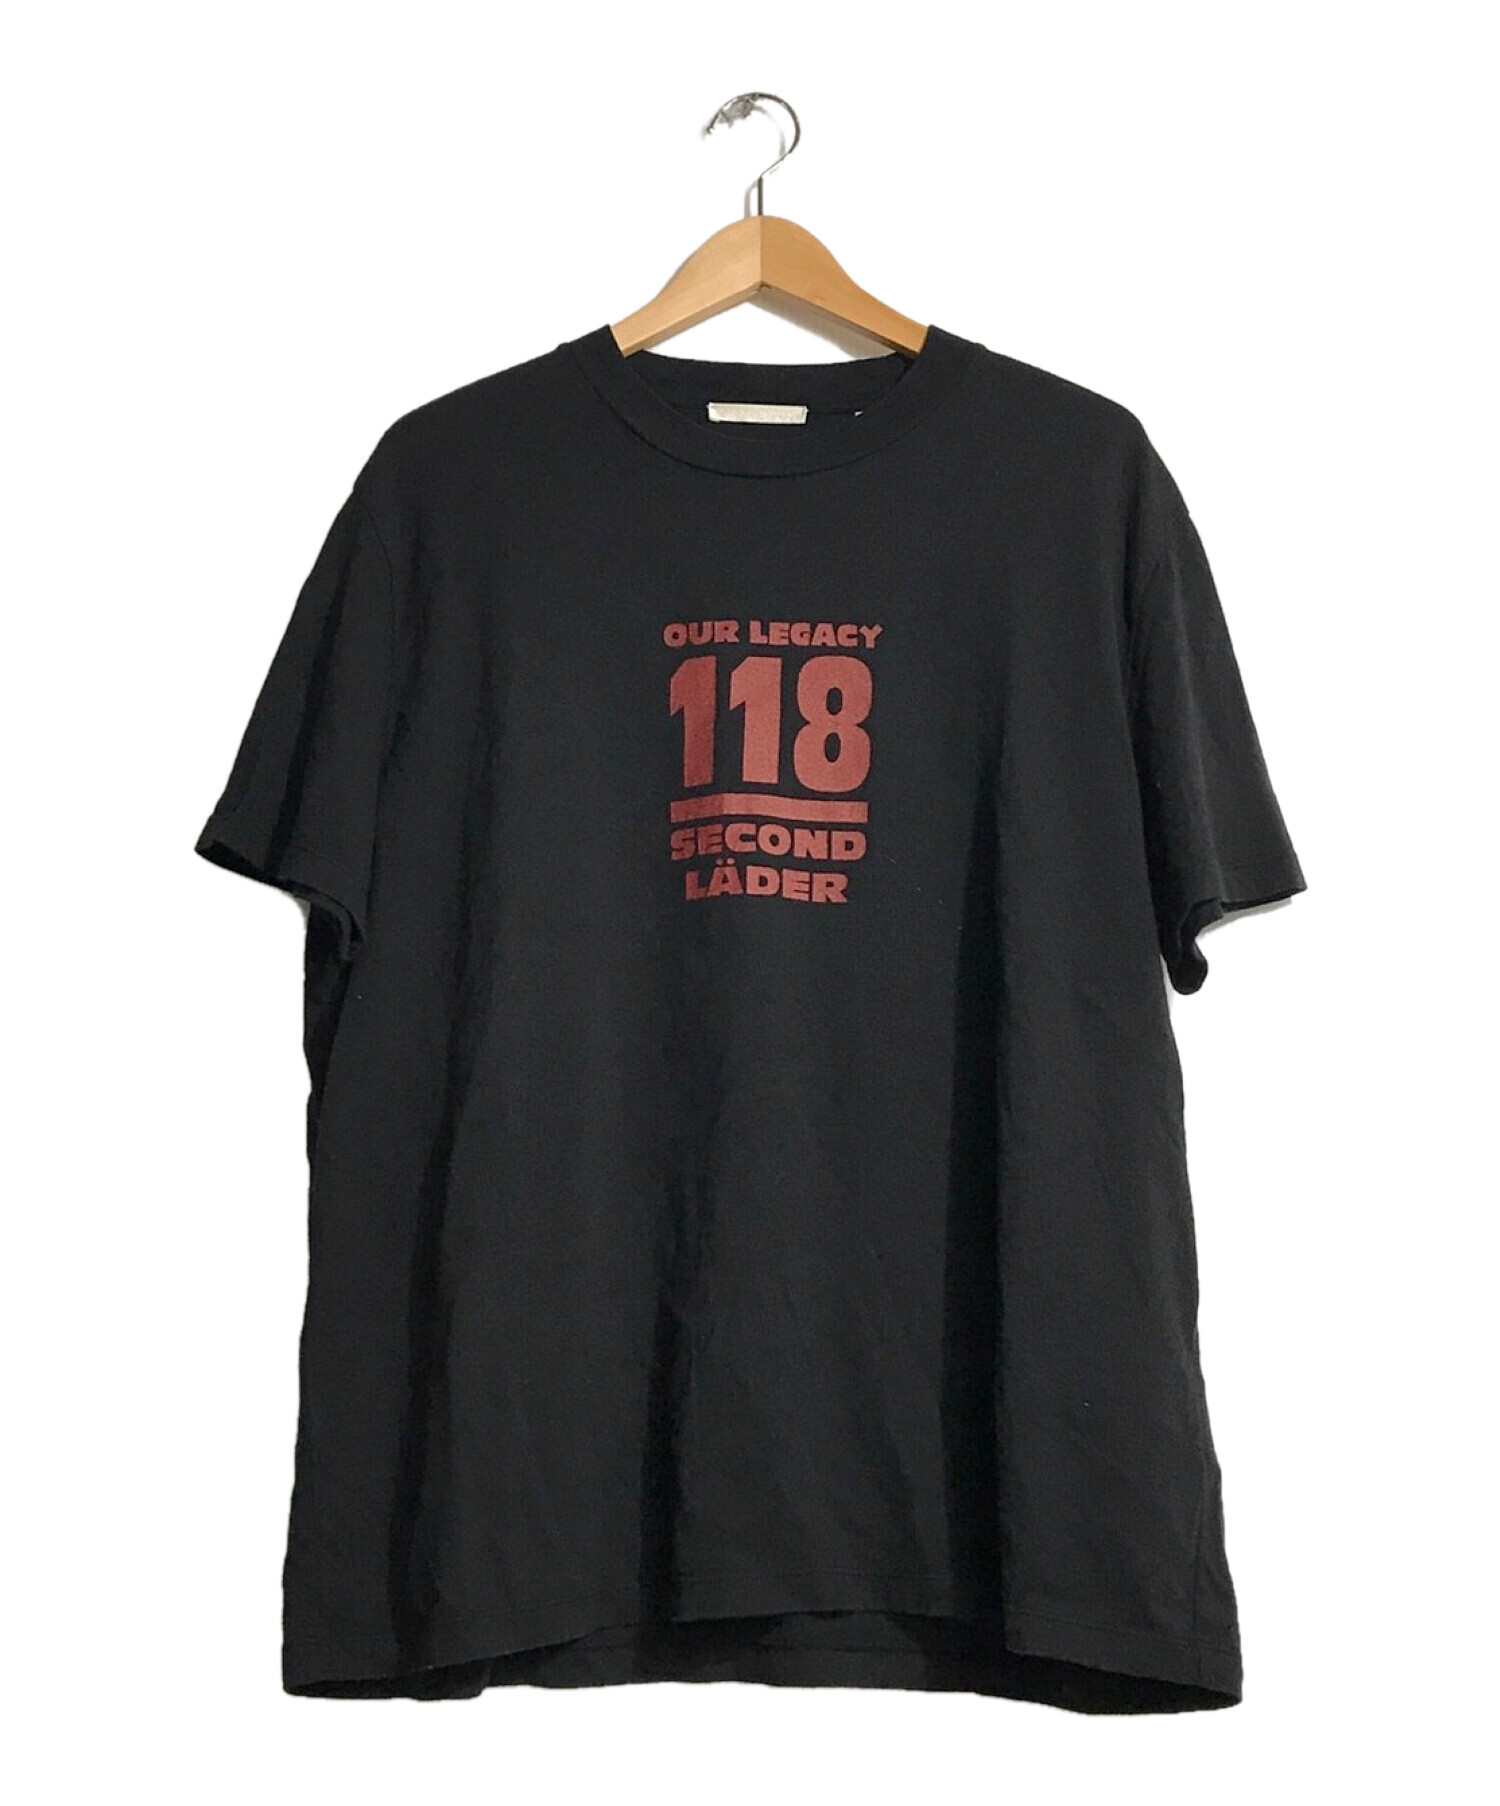 OUR LEGACY アワーレガシー　tシャツ